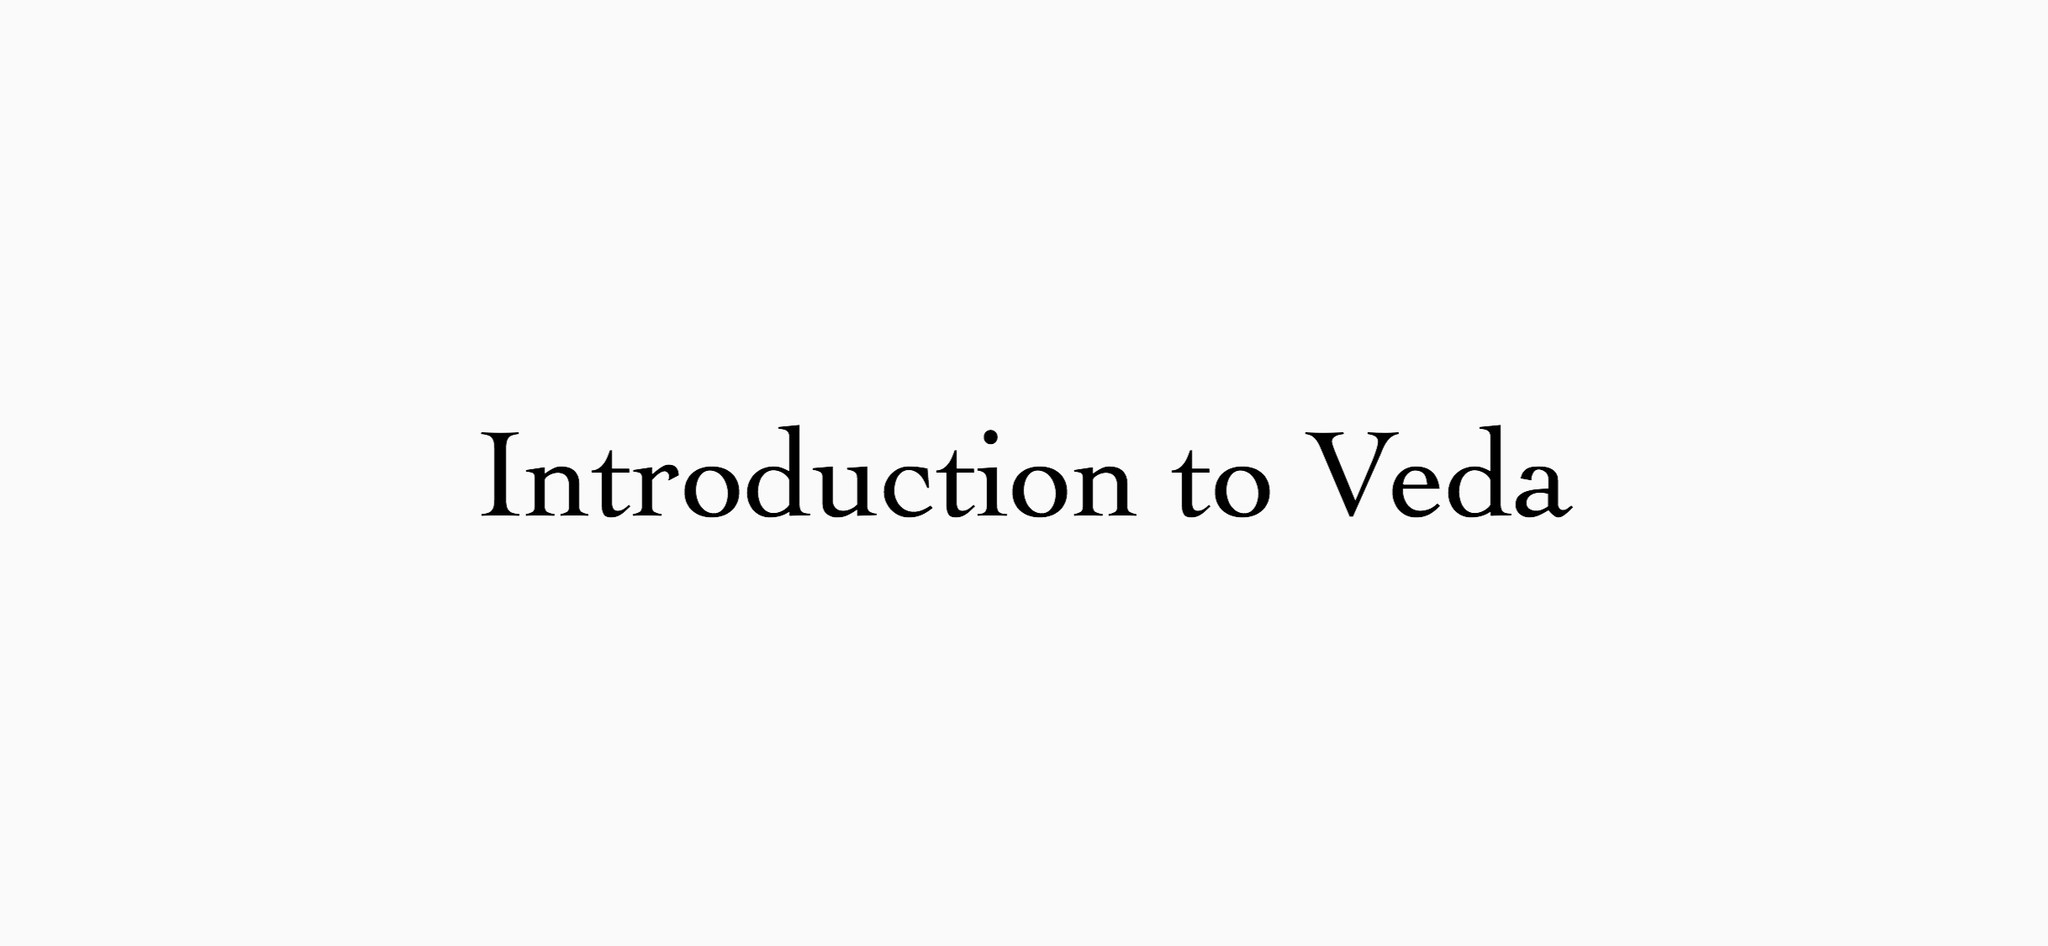 Introduction to Veda